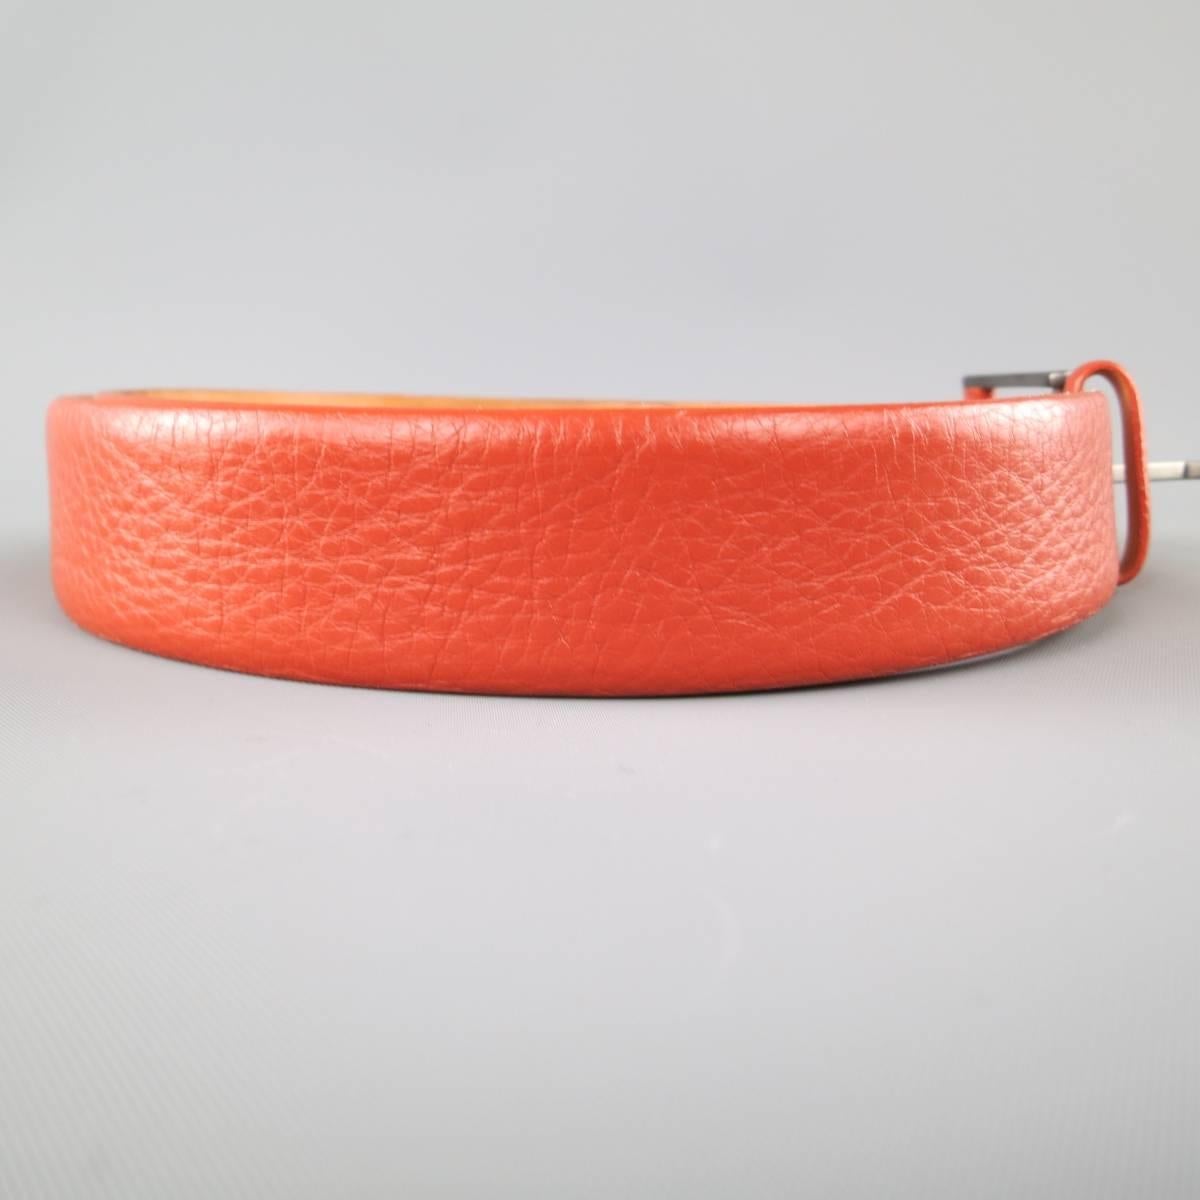 GIORGIO ARMANI dress belt features a rich burnt orange pebbled leather strap with a smoke silver tone, leather detailed, buckle. Made in Italy.
 
Good Pre-Owned Condition.
Marked: 48
 
Length: 38.5 in.
Width: 1.25 in.
Fits: 32-36 in.

SKU: 84647